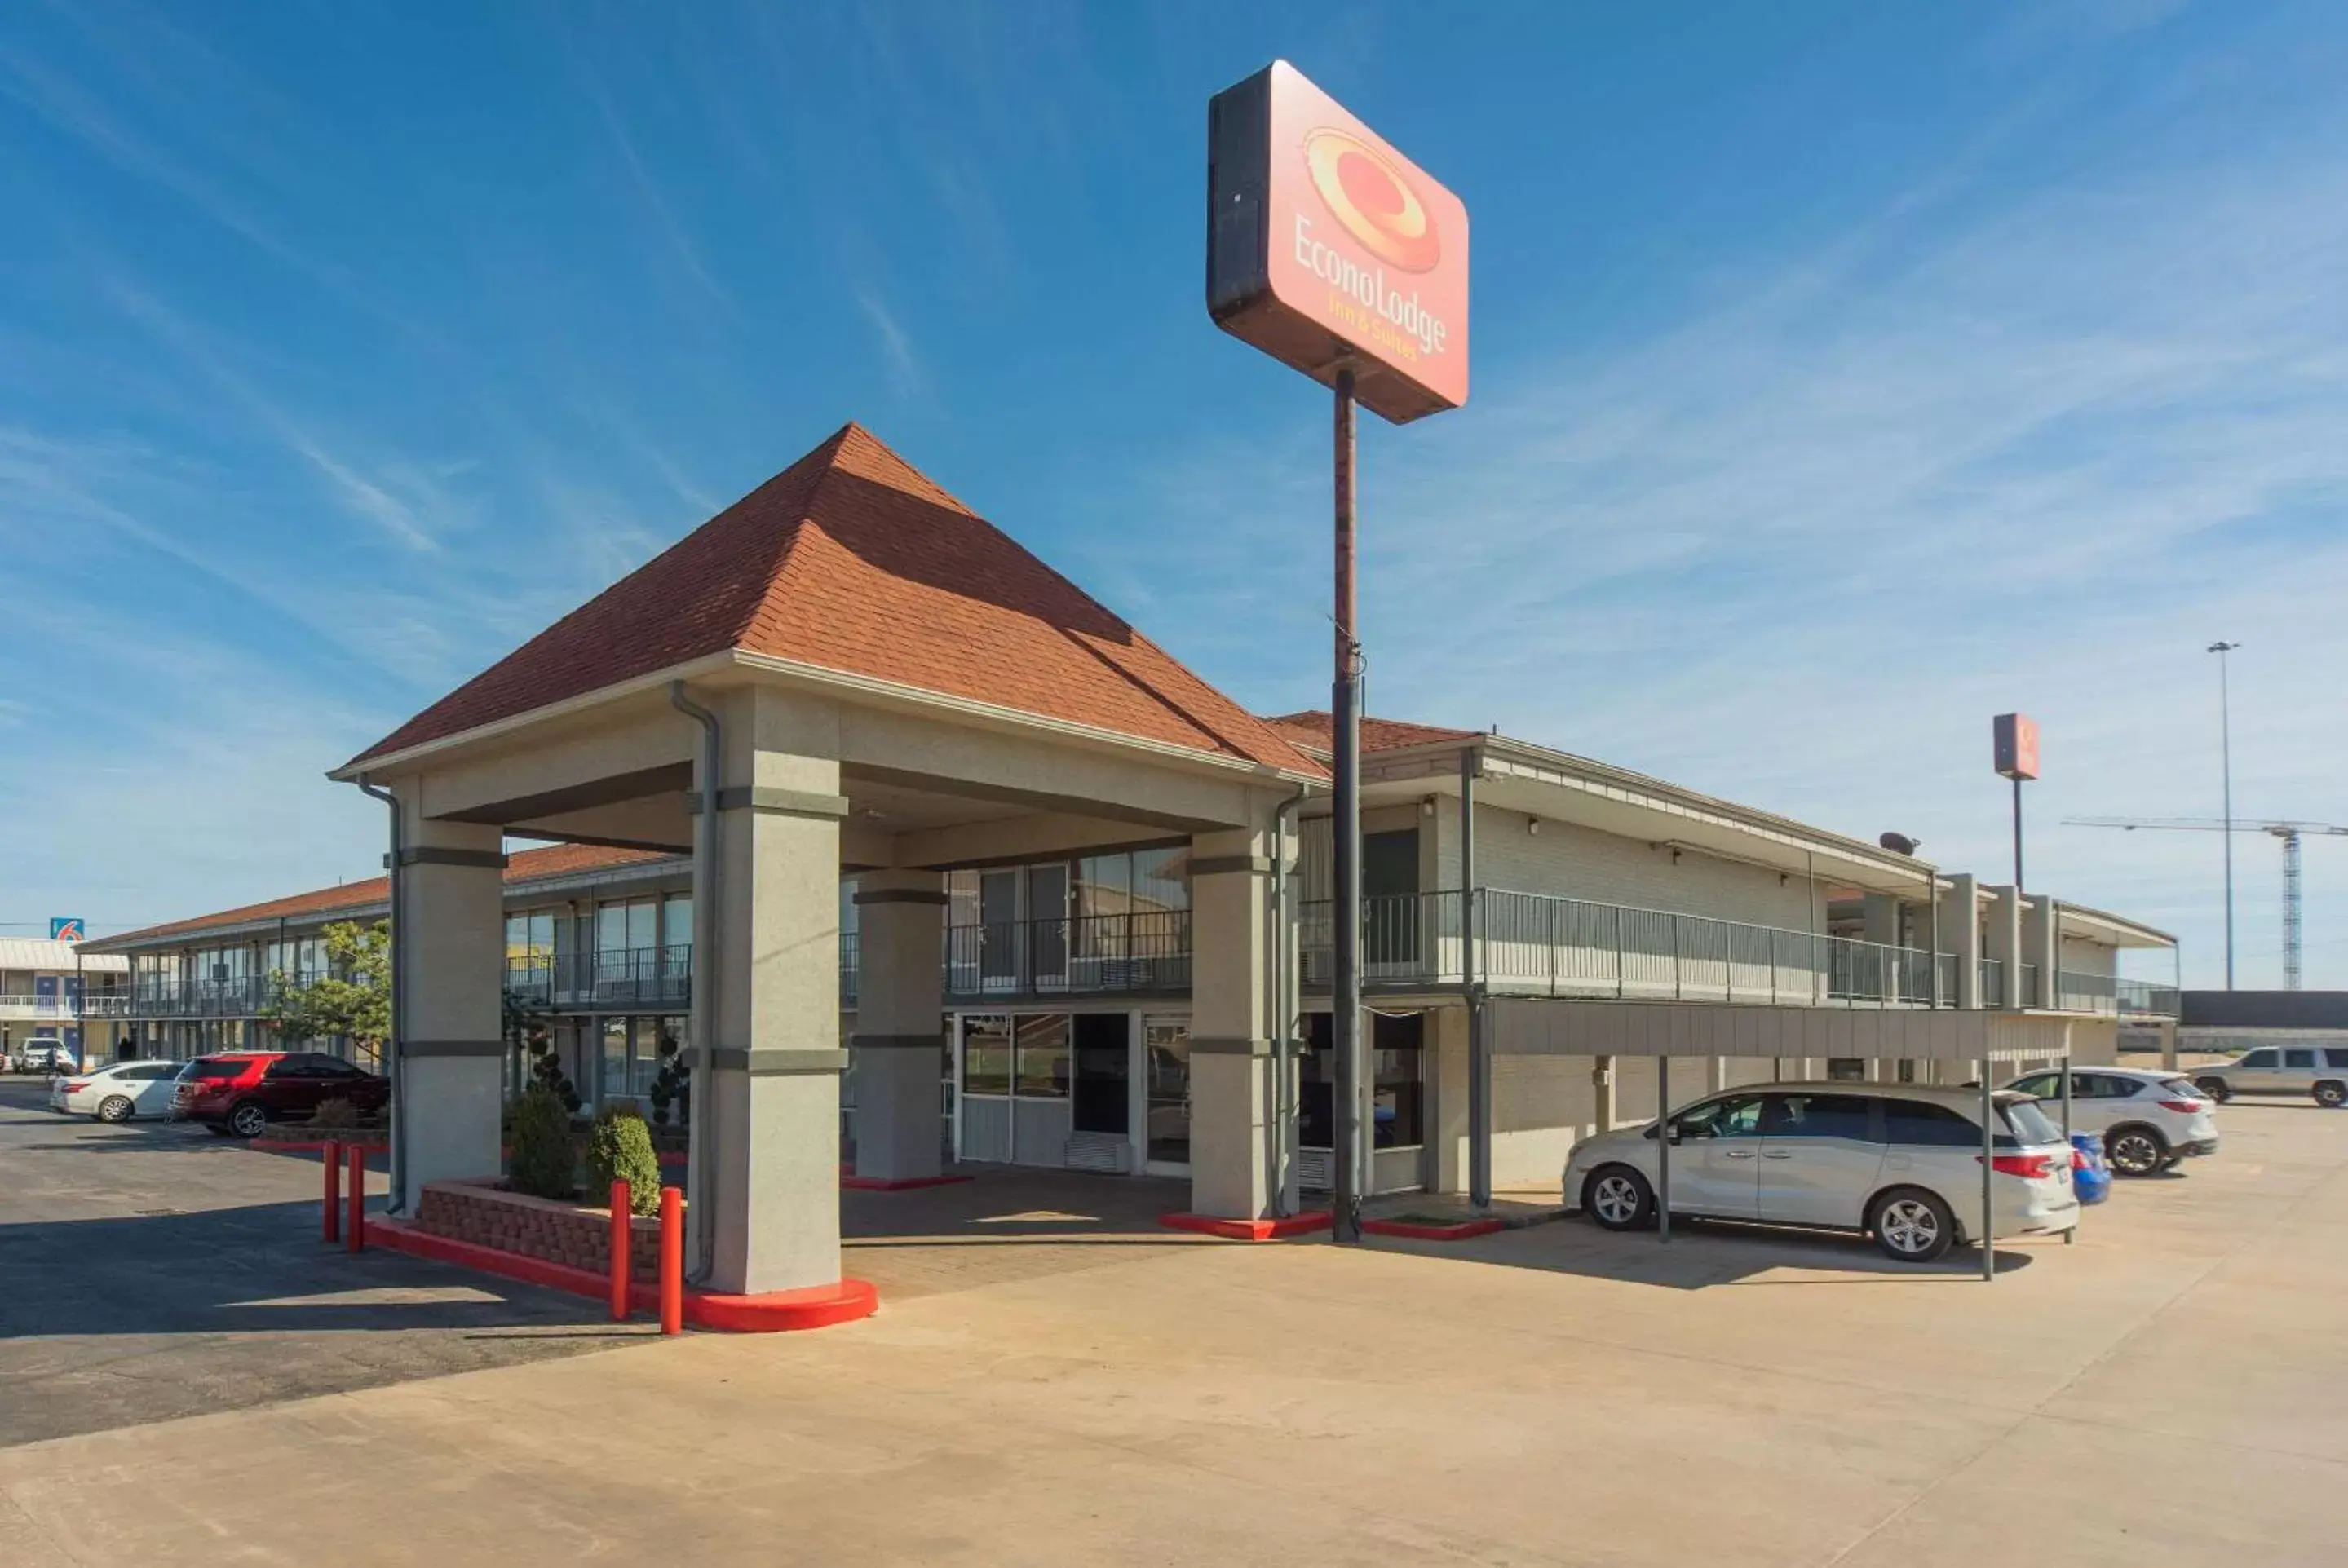 Property Building in Econo Lodge Inn & Suites Near Bricktown